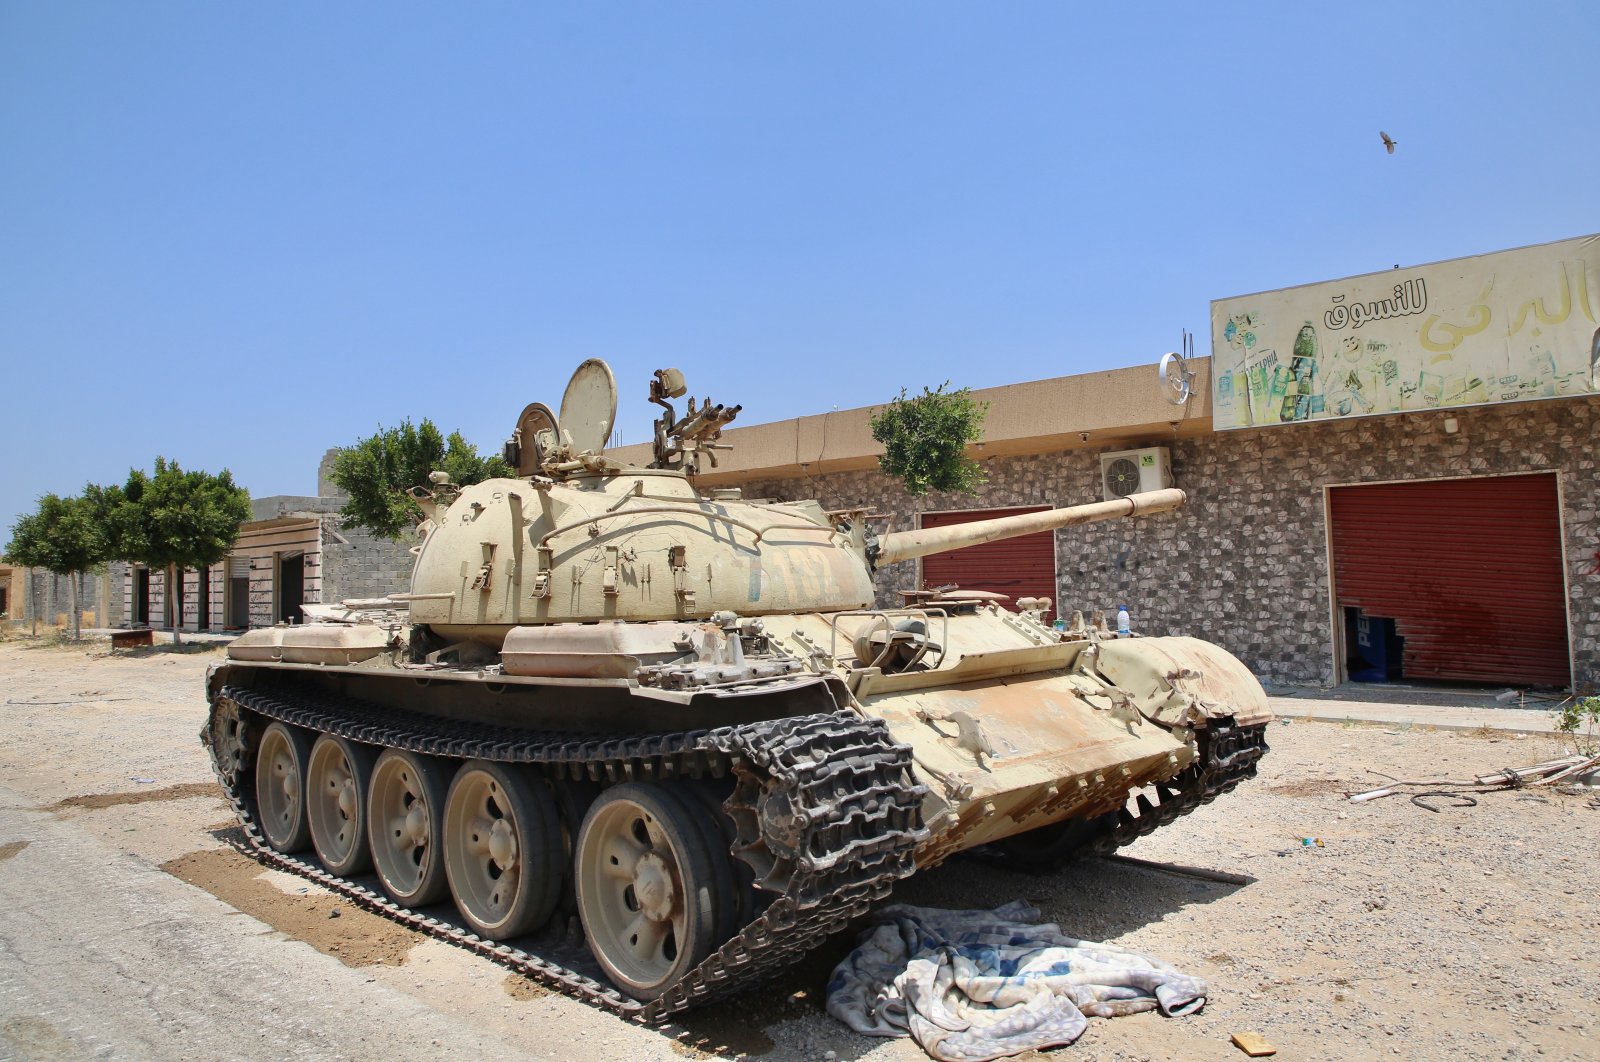 A Libyan Army tank is pictured in areas near the Libyan capital, from where Haftar's forces withdrew, Tripoli, June 2, 2020 (AA Photo)